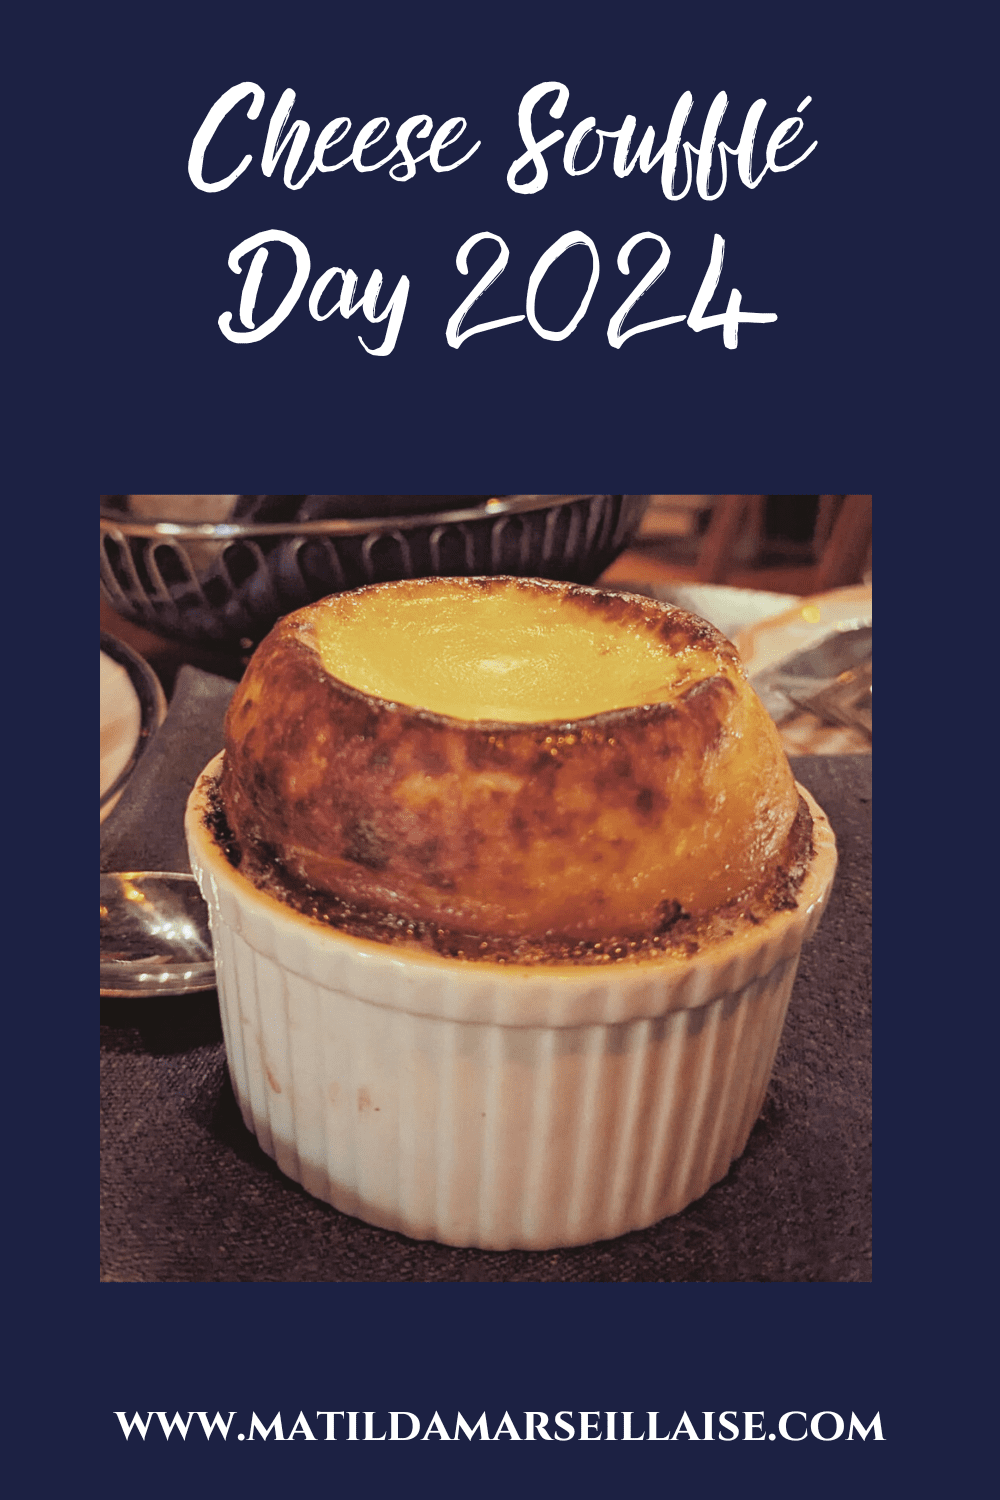 Cheese Soufflé Day 2024: 10 facts and some French wine pairings